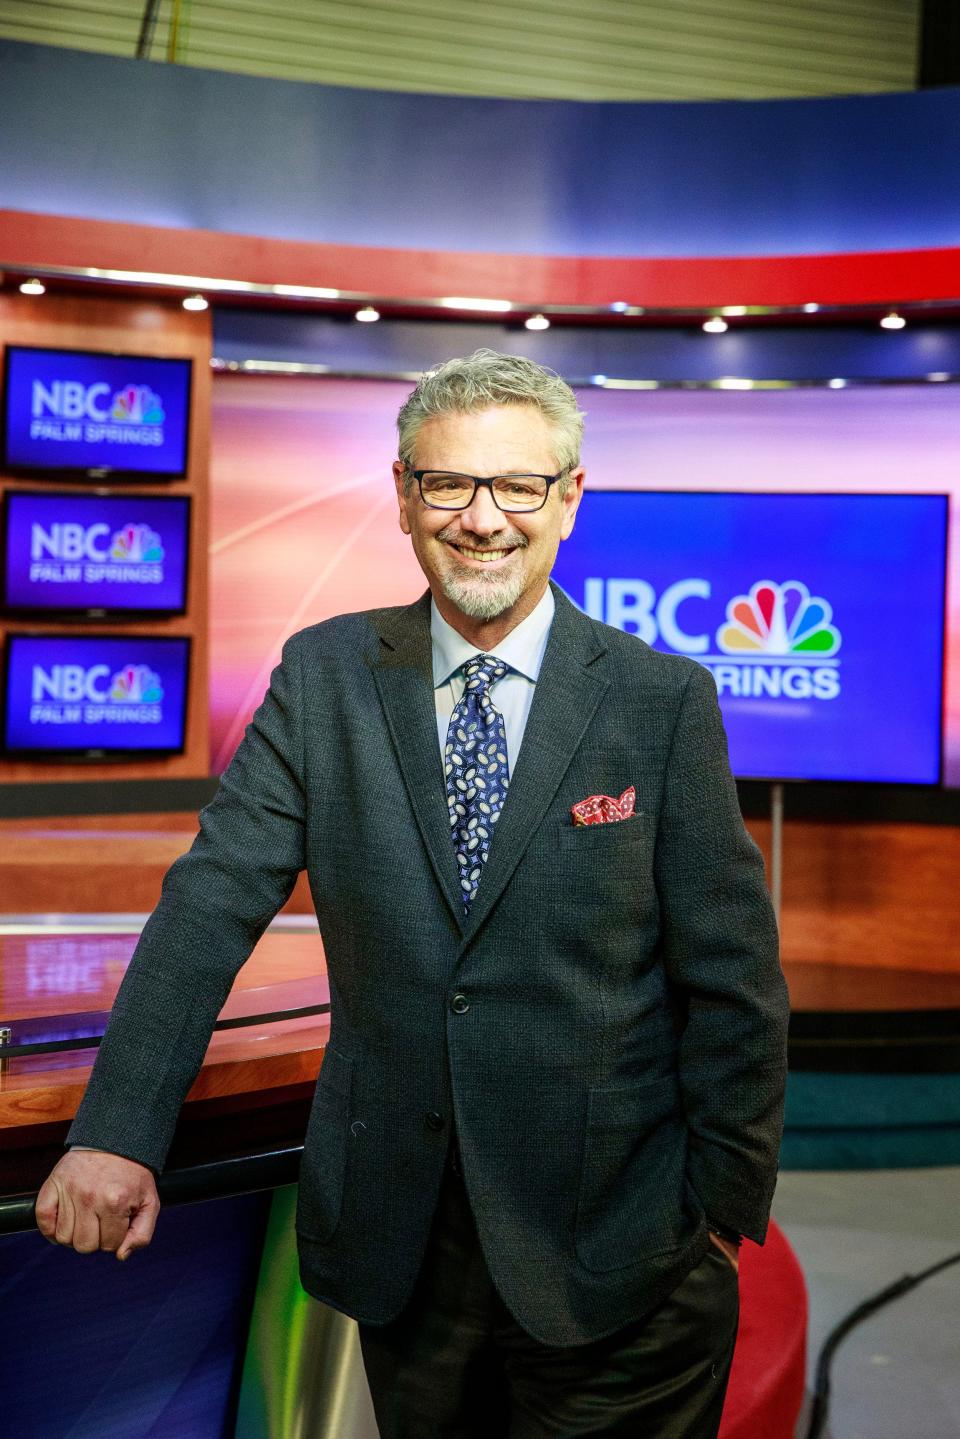 Longtime sports anchor in the Los Angeles television and radio market, Fred Roggin, is photographed inside the NBC Palm Springs studio in Palm Desert, Calif., on Nov. 27, 2023. Roggin will be doing a new show for NBC Palm Springs beginning in January.